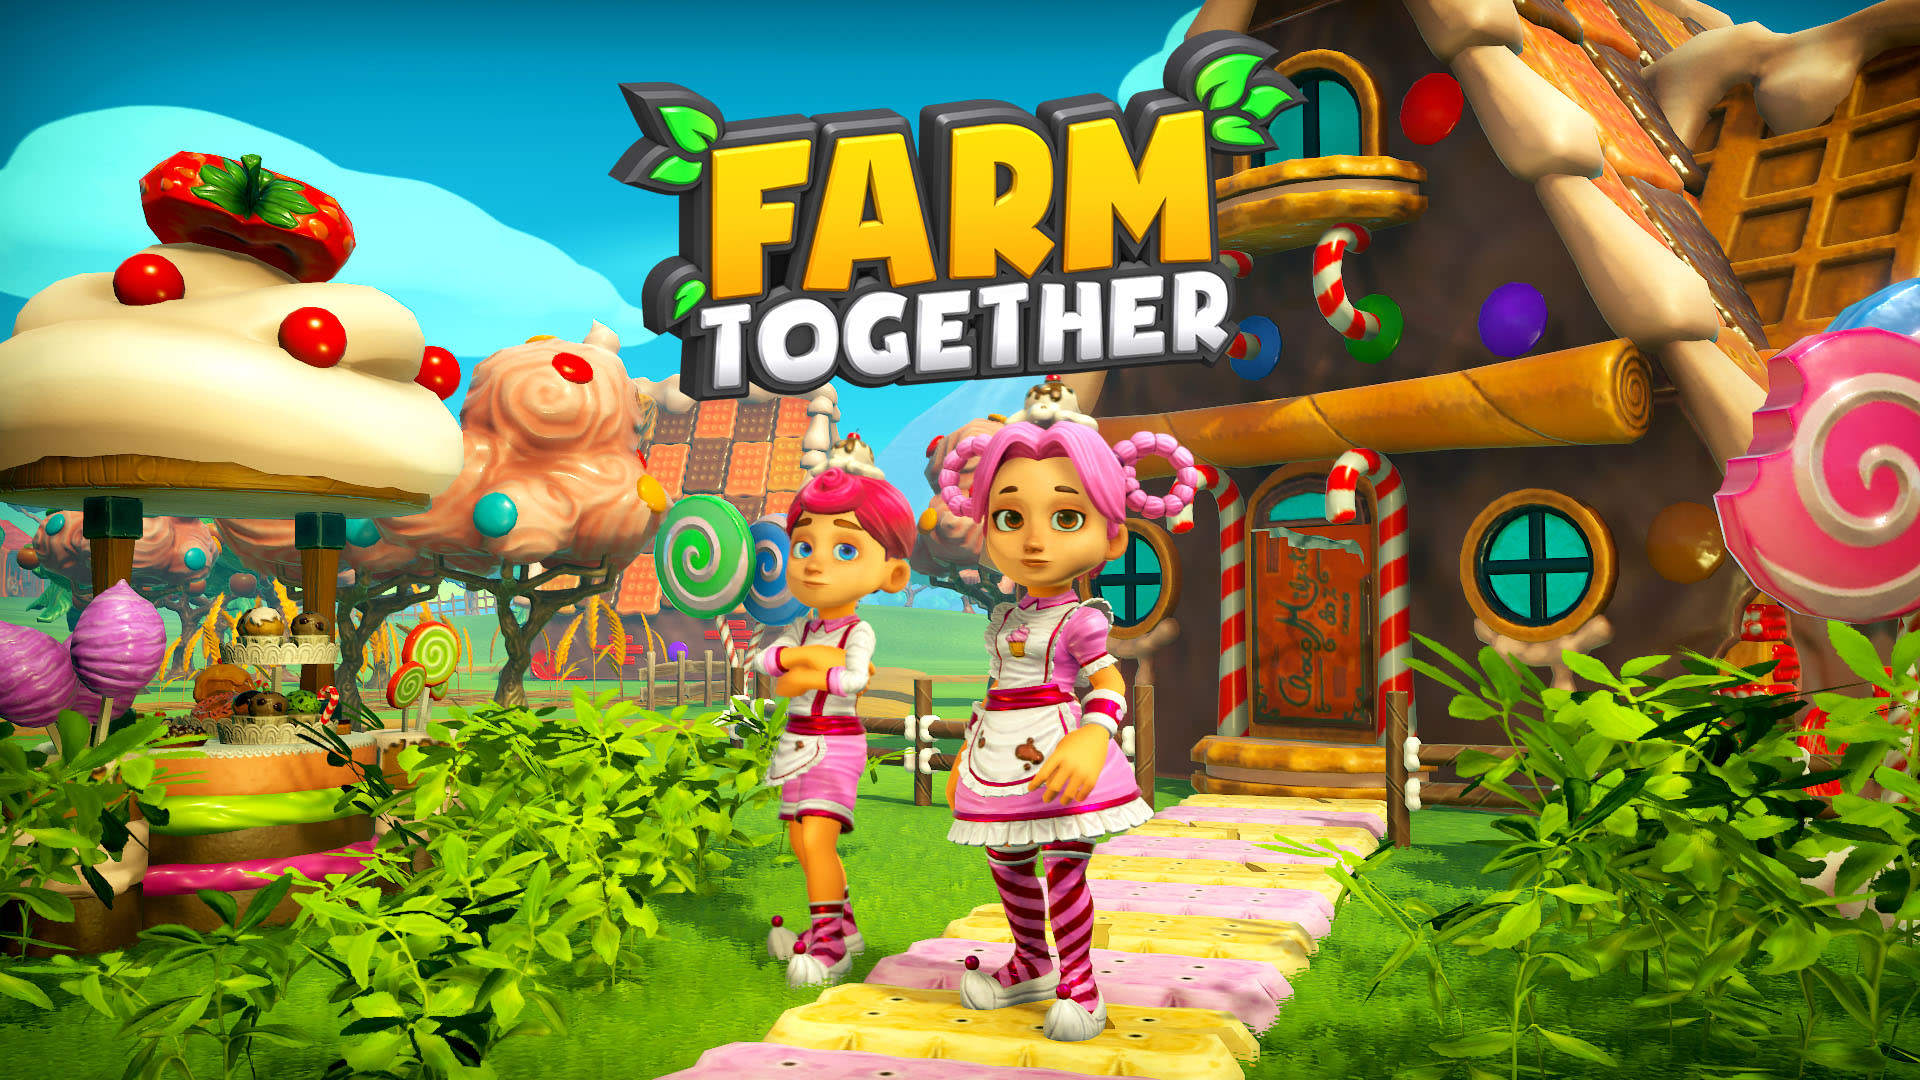 Farm Together - Candy Pack 1